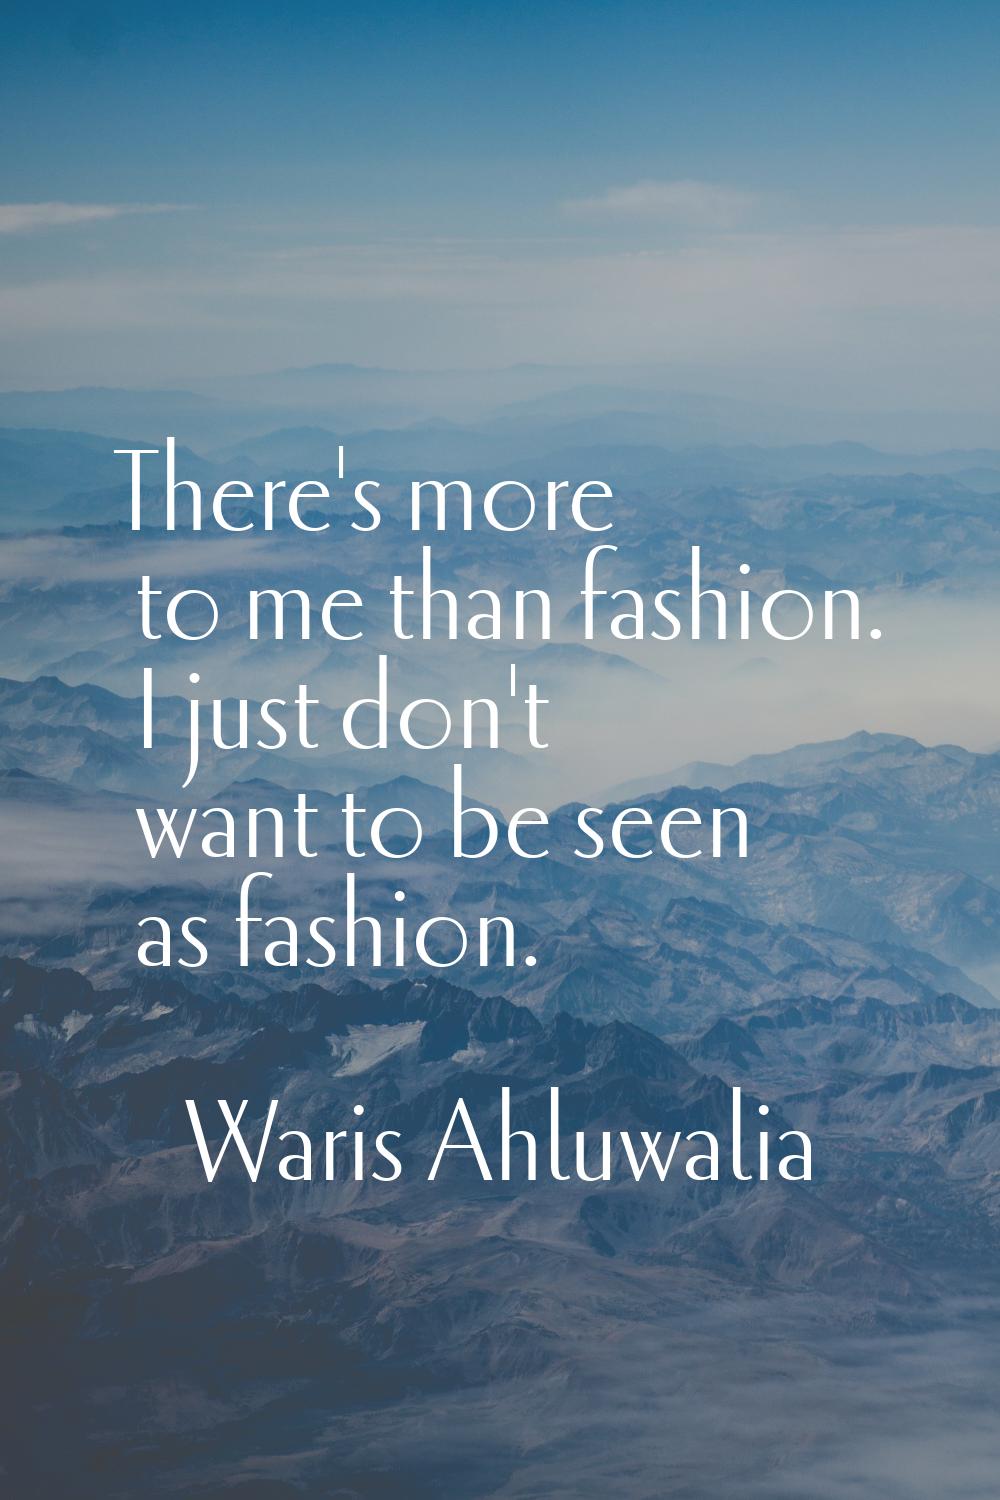 There's more to me than fashion. I just don't want to be seen as fashion.